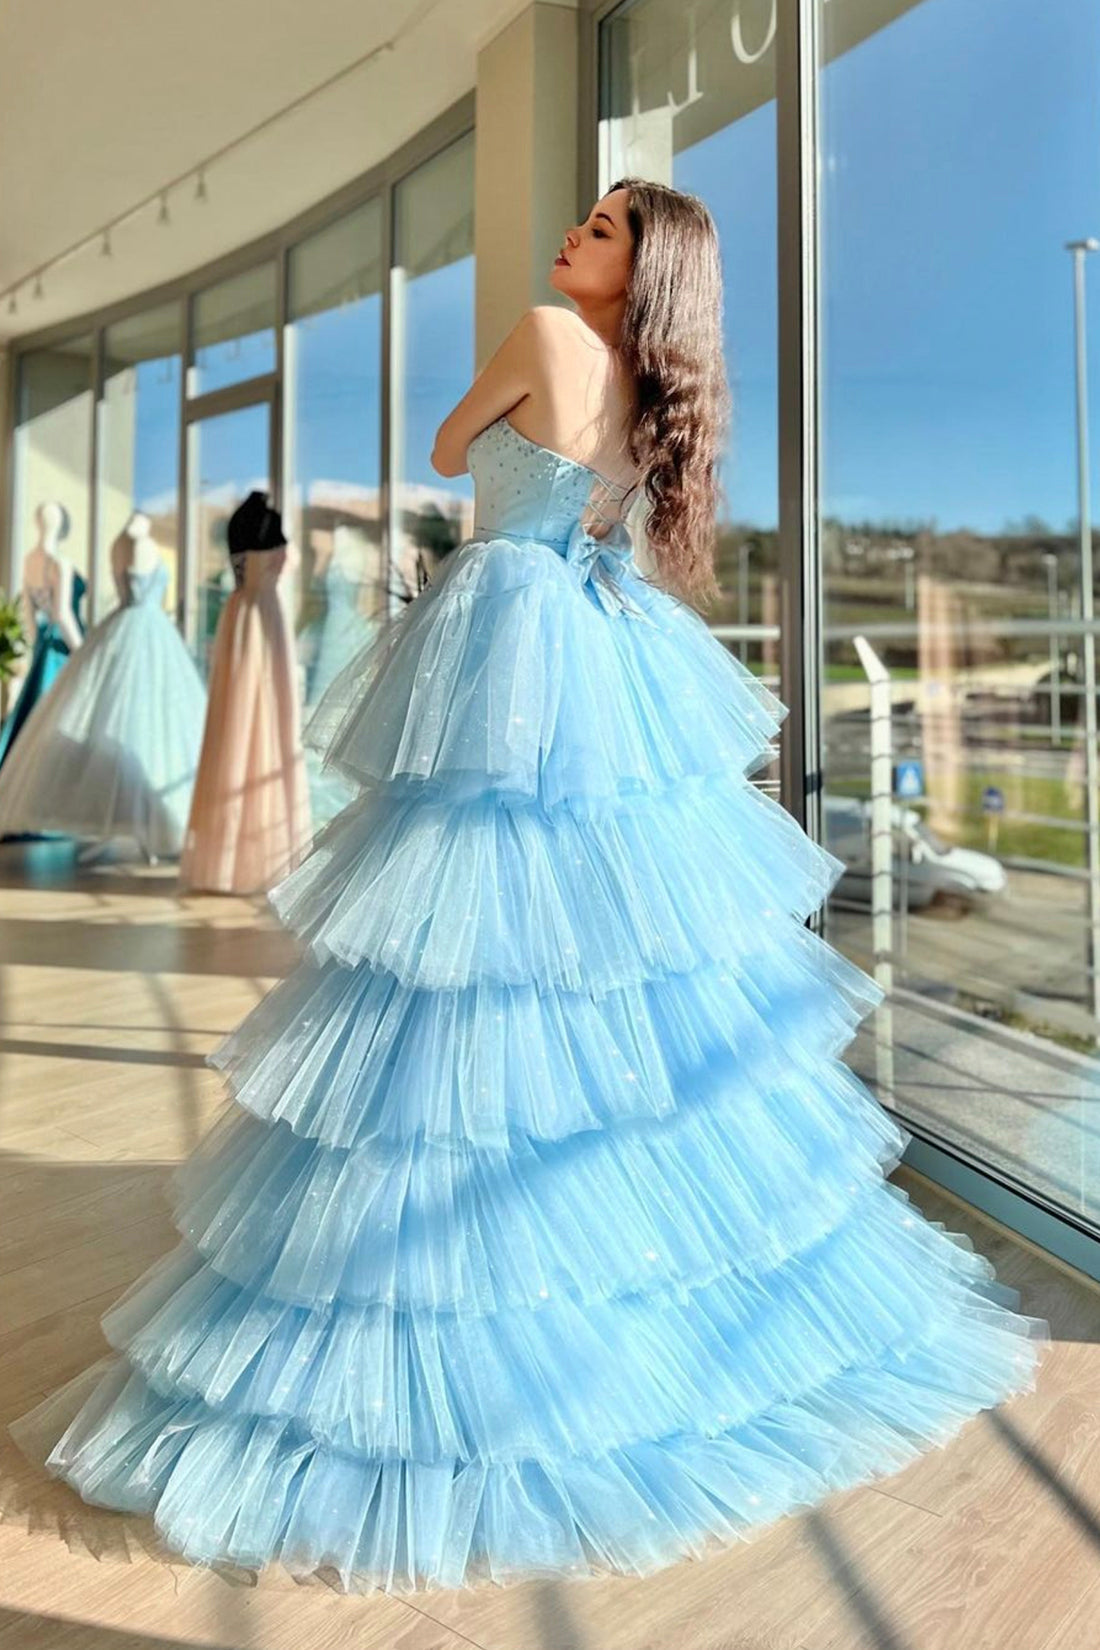 Aleena | Blue Sweetheart Neck Tulle Long Prom Dress, Beautiful A-Line High Low Party Dress